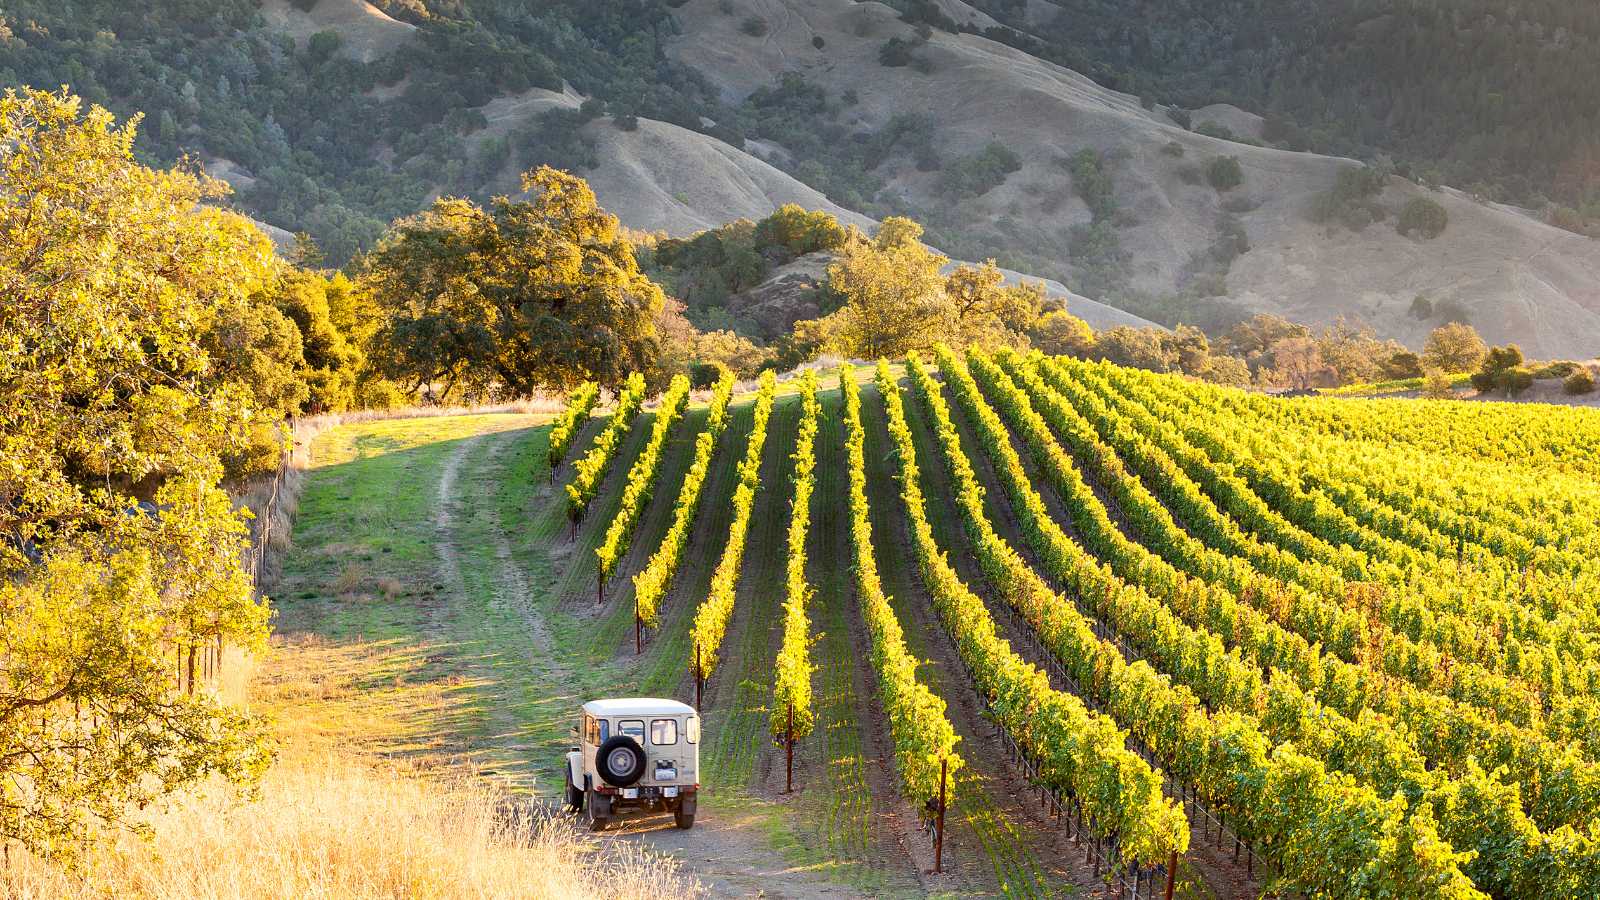 SUV drives through the vineyards in sonoma, highlighting the best things to do in sonoma county